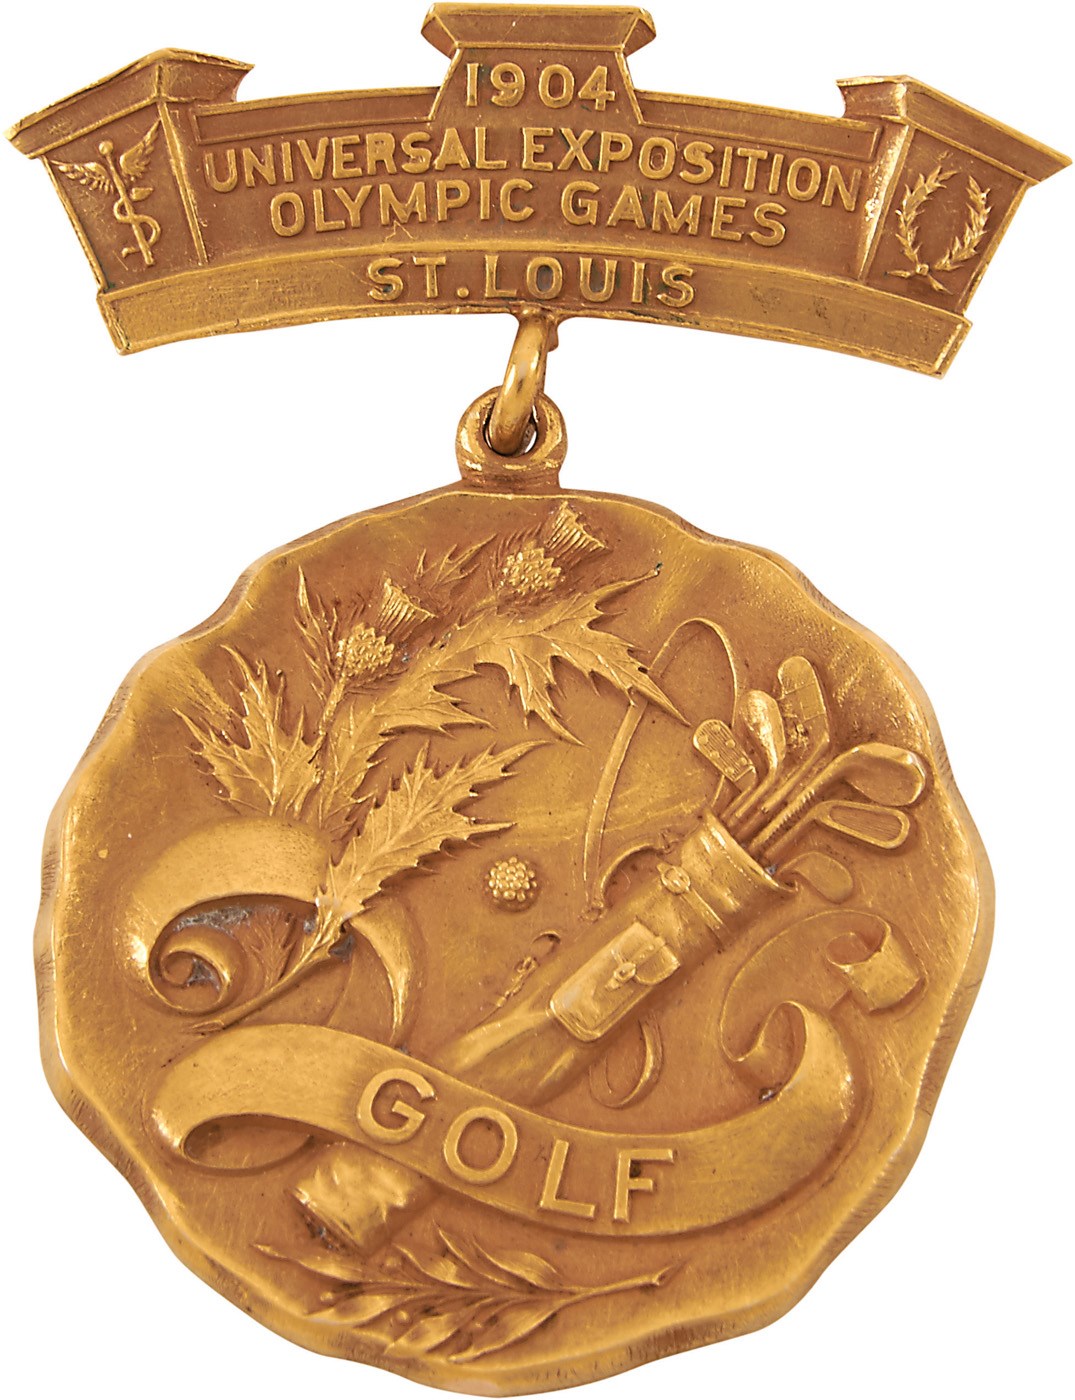 Olympics and All Sports - 1904 Olympic Gold Medal for Golf Presented to Chandler Egan